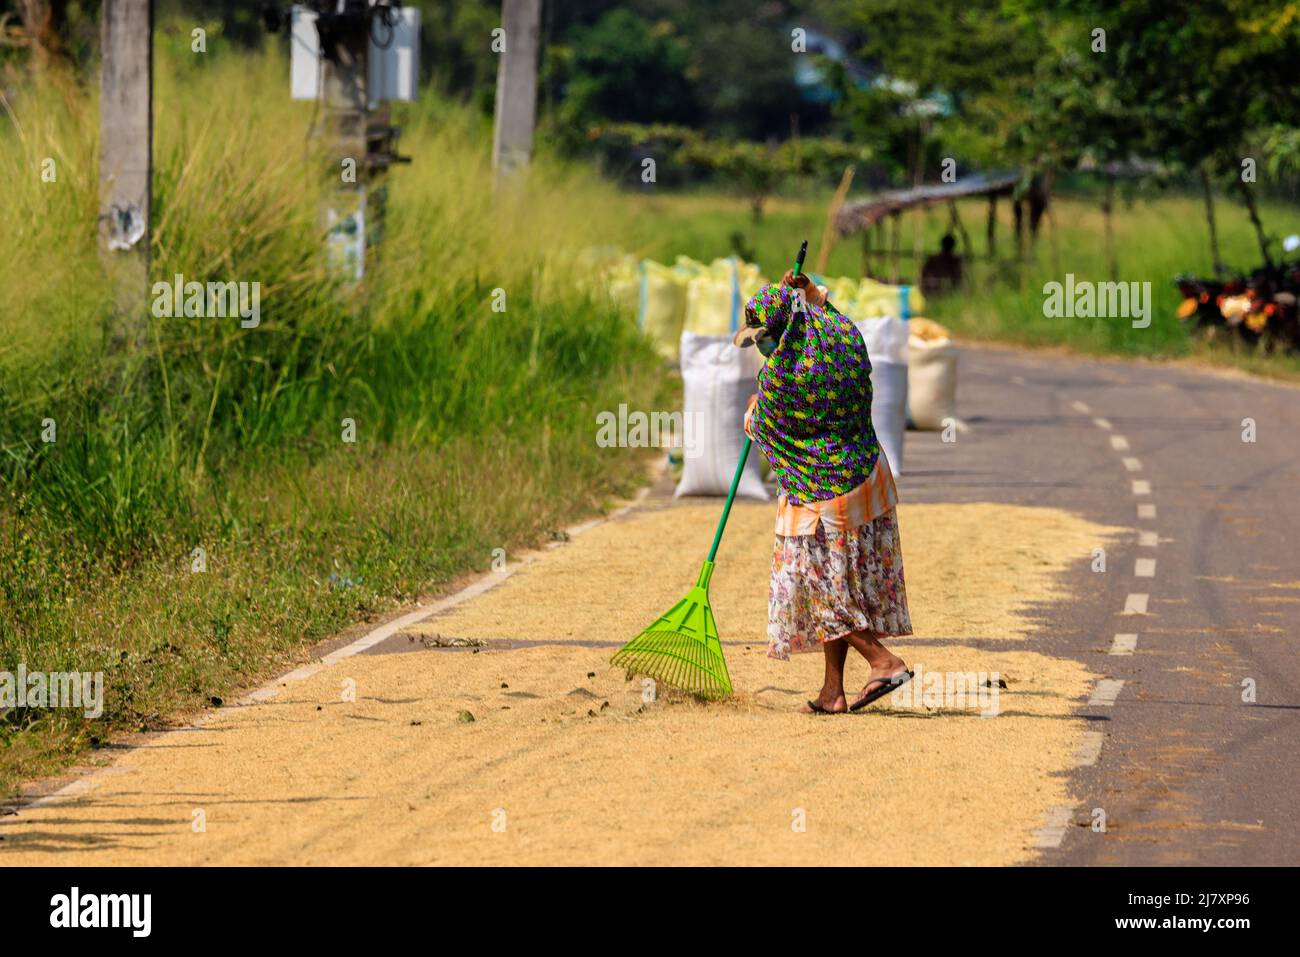 locals spread rice to dry on the tarmac of the road in the sunshine reducing the traffic to single lane Stock Photo